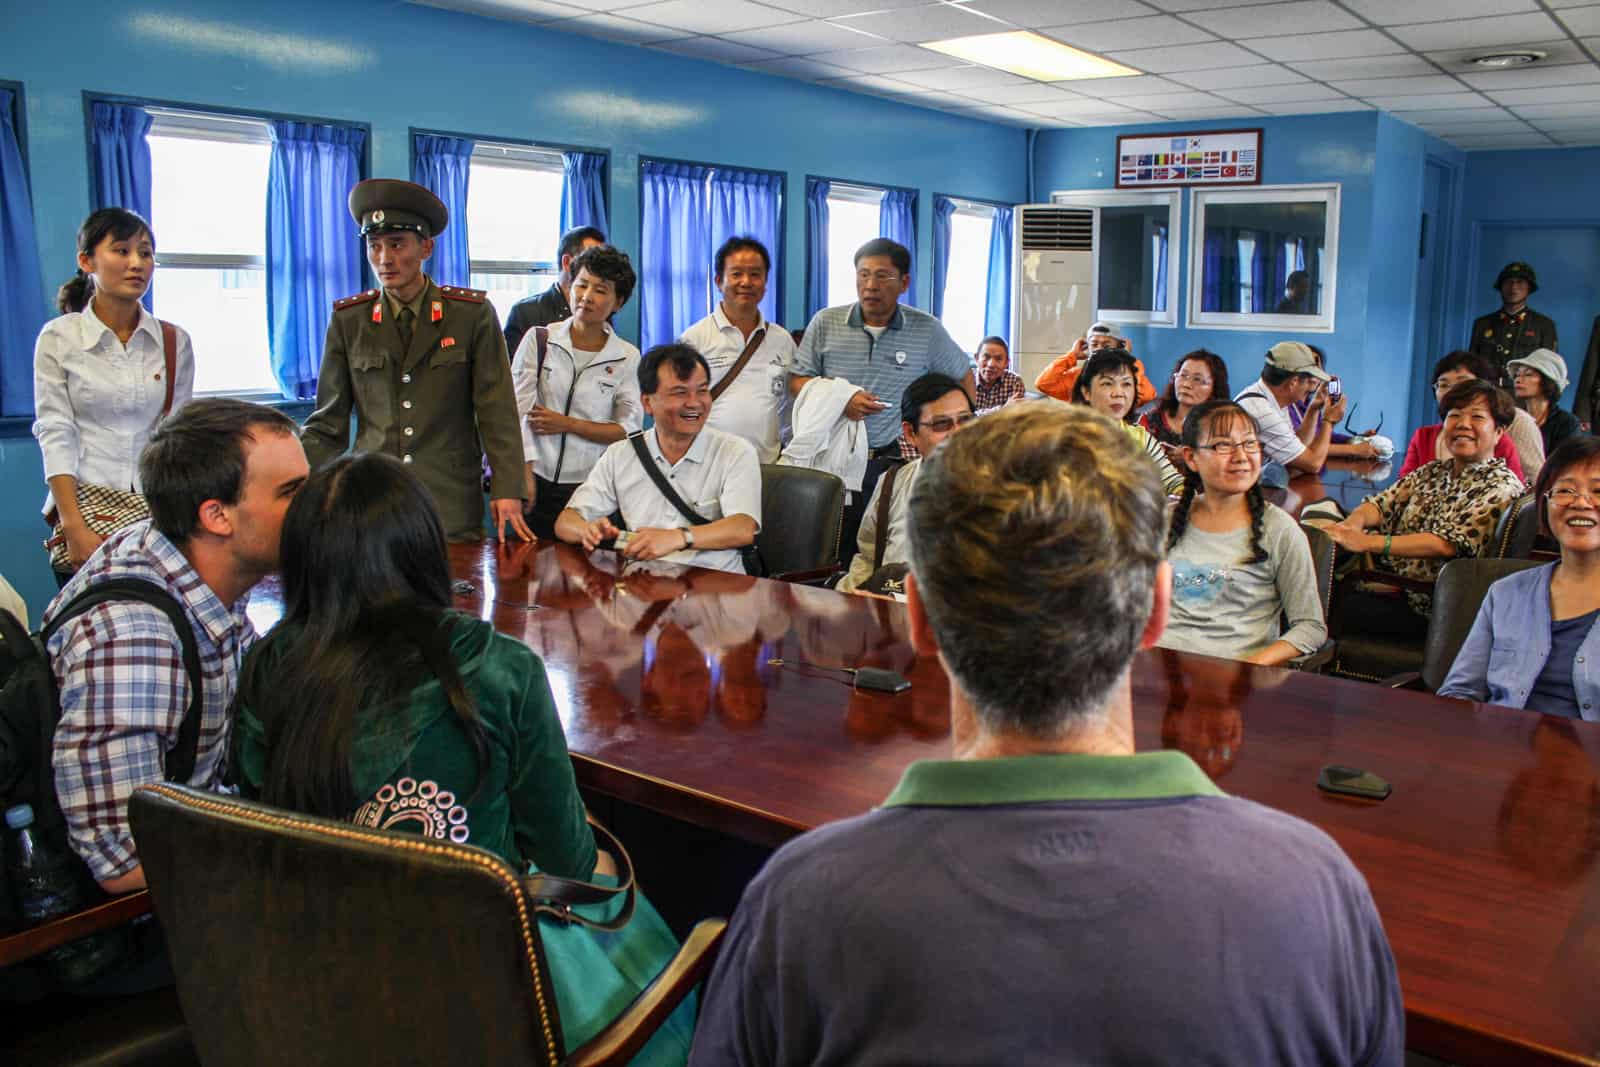 Tourists sit around a table in the Military Armistice Commission Conference Room when visiting the DMZ in North Korea. A North Korean guard in military green uniform is present. 